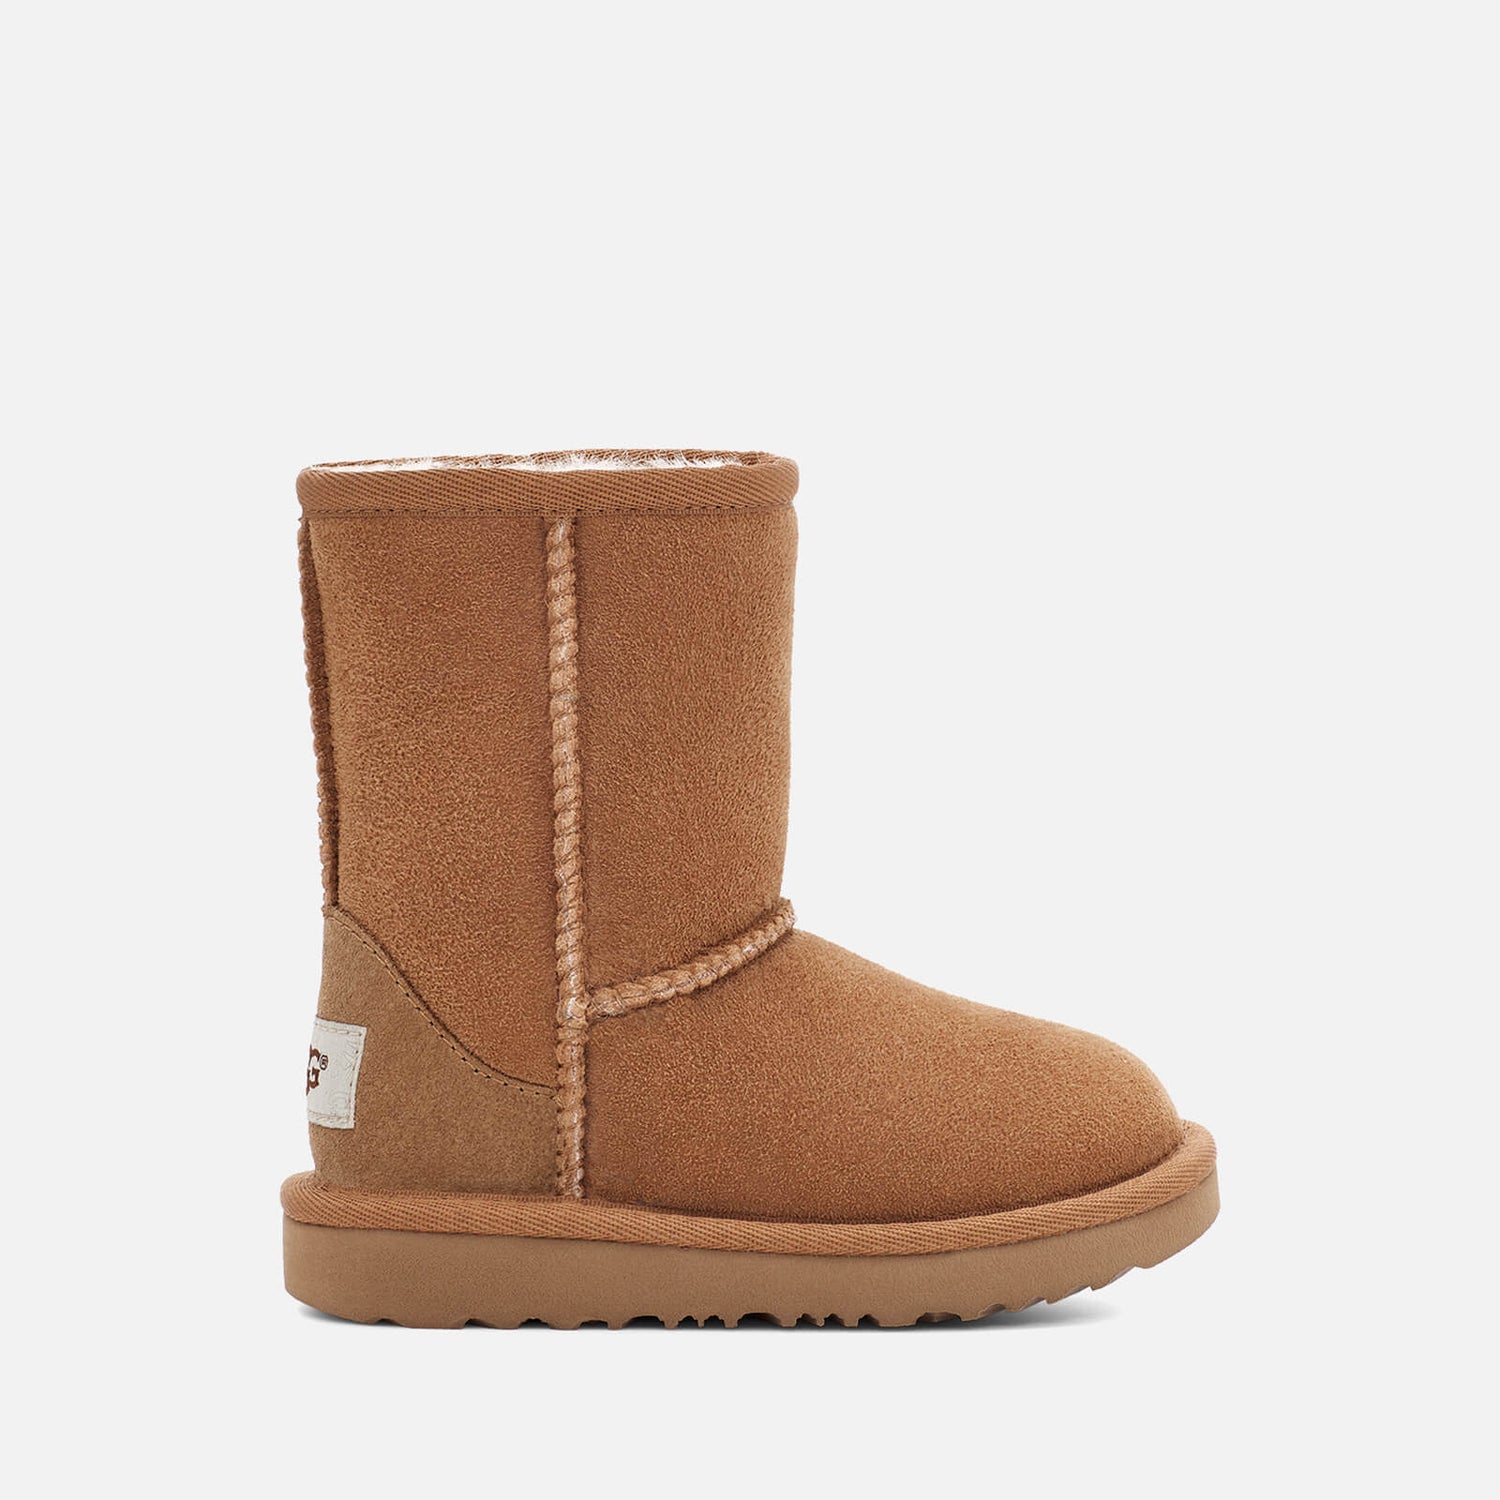 UGG Toddlers' Classic II Waterproof Boots - Chestnut